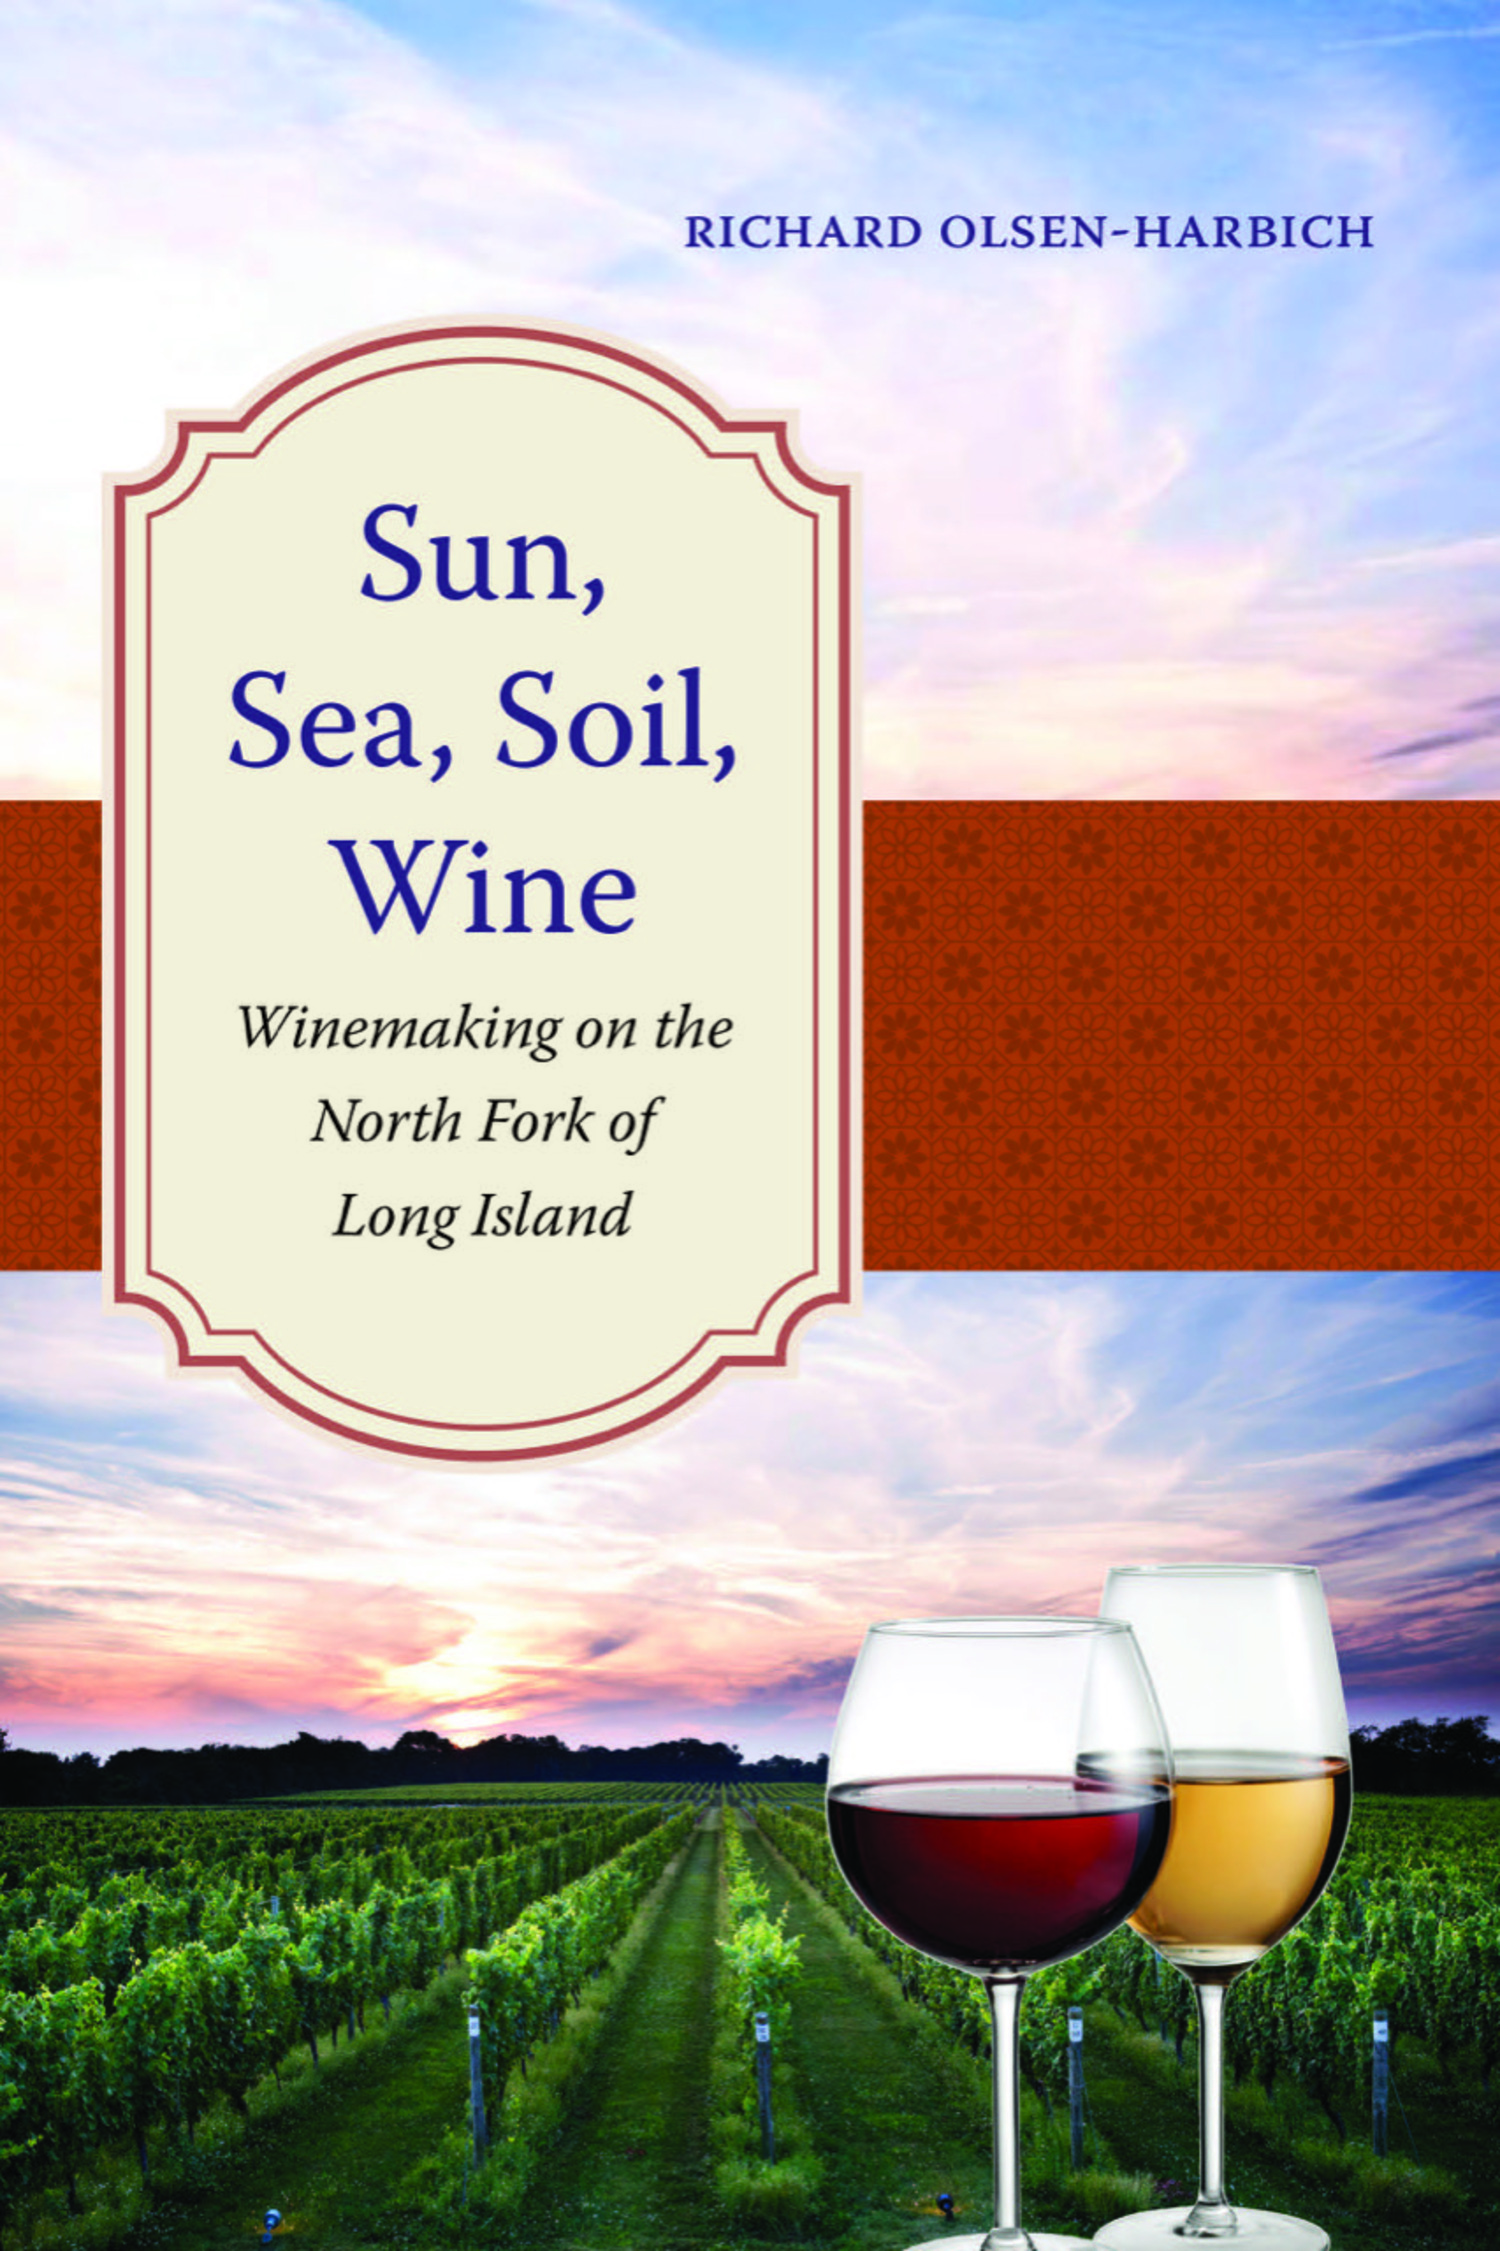 Bedell Cellars winemaker Richard Olsen-Harbich, is author of “Sun, Sea, Soil, Wine: Winemaking on the North Fork of Long Island.”